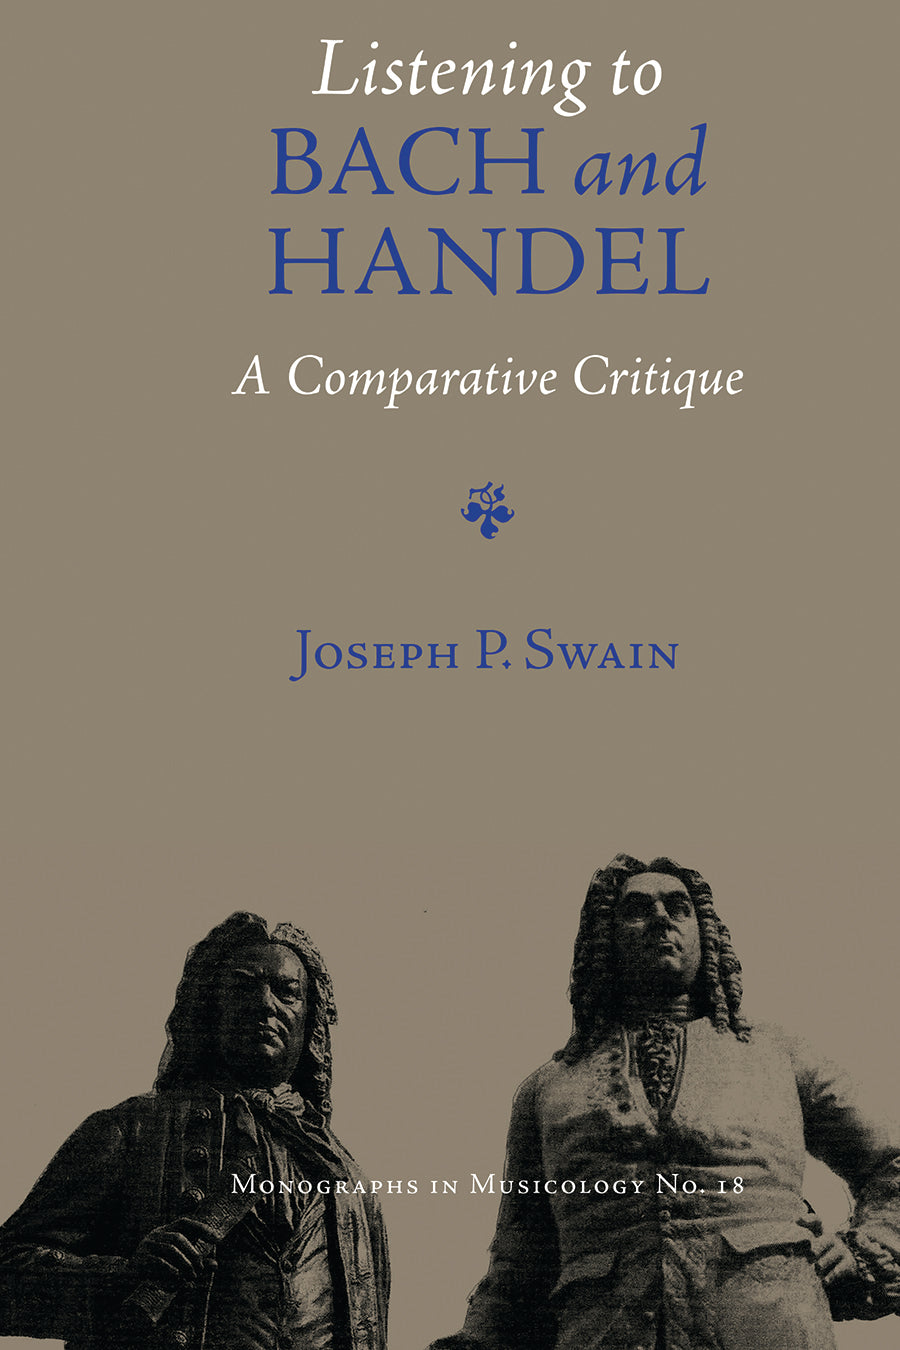 Listening to Bach and Handel: A Comparitive Critique